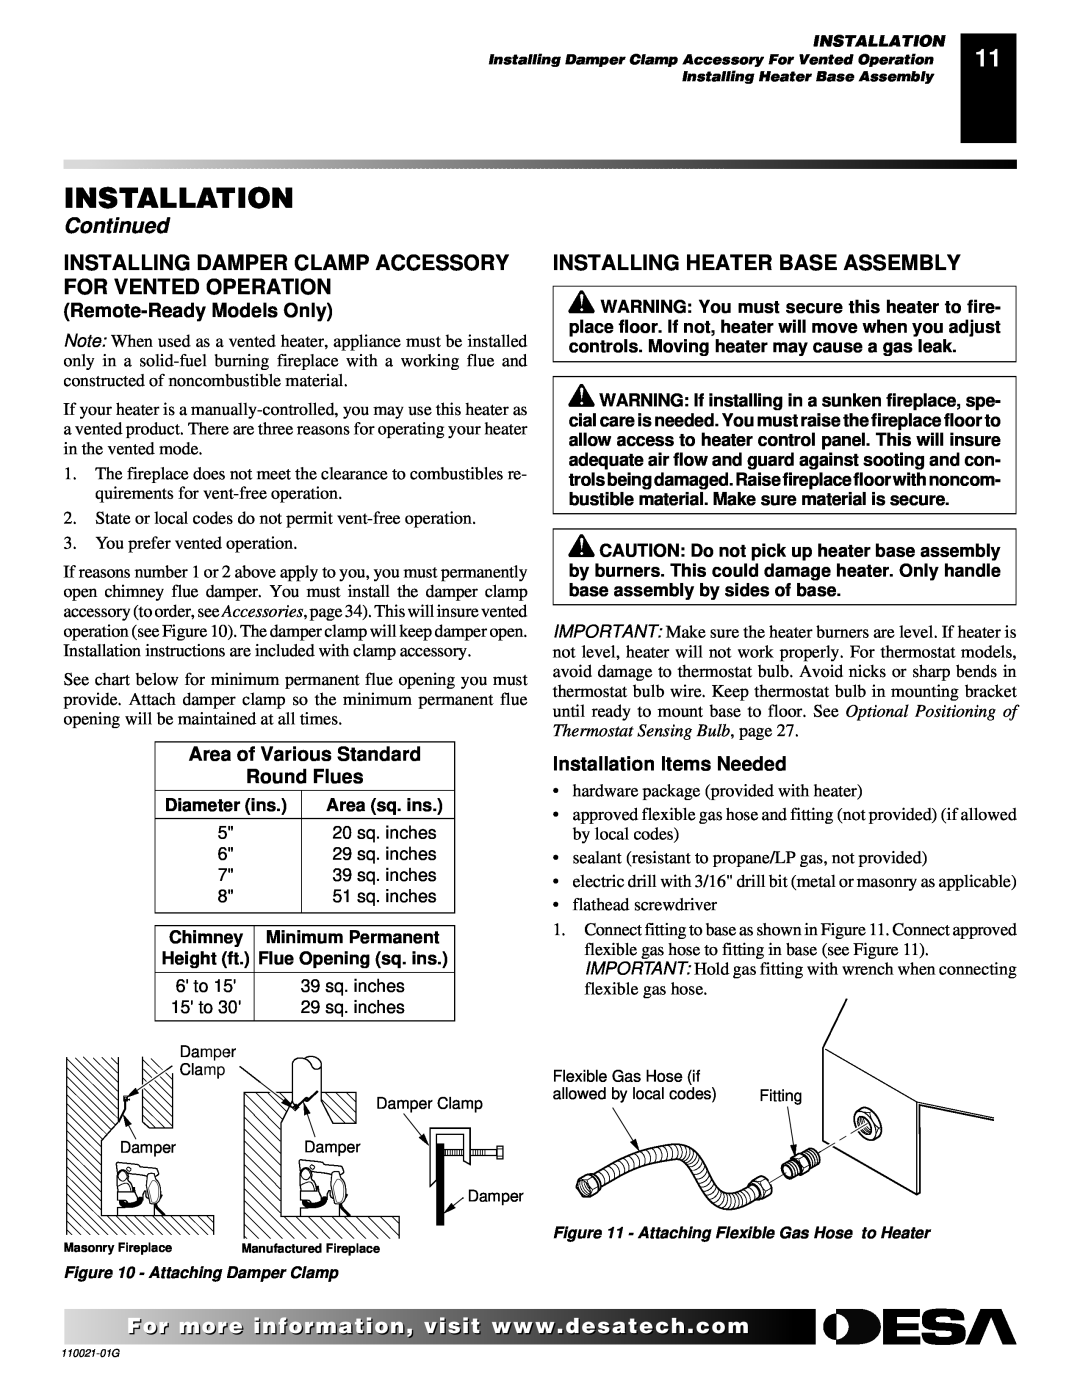 Desa CSG3930NR Installing Heater Base Assembly, Remote-ReadyModels Only, Area of Various Standard Round Flues, Continued 